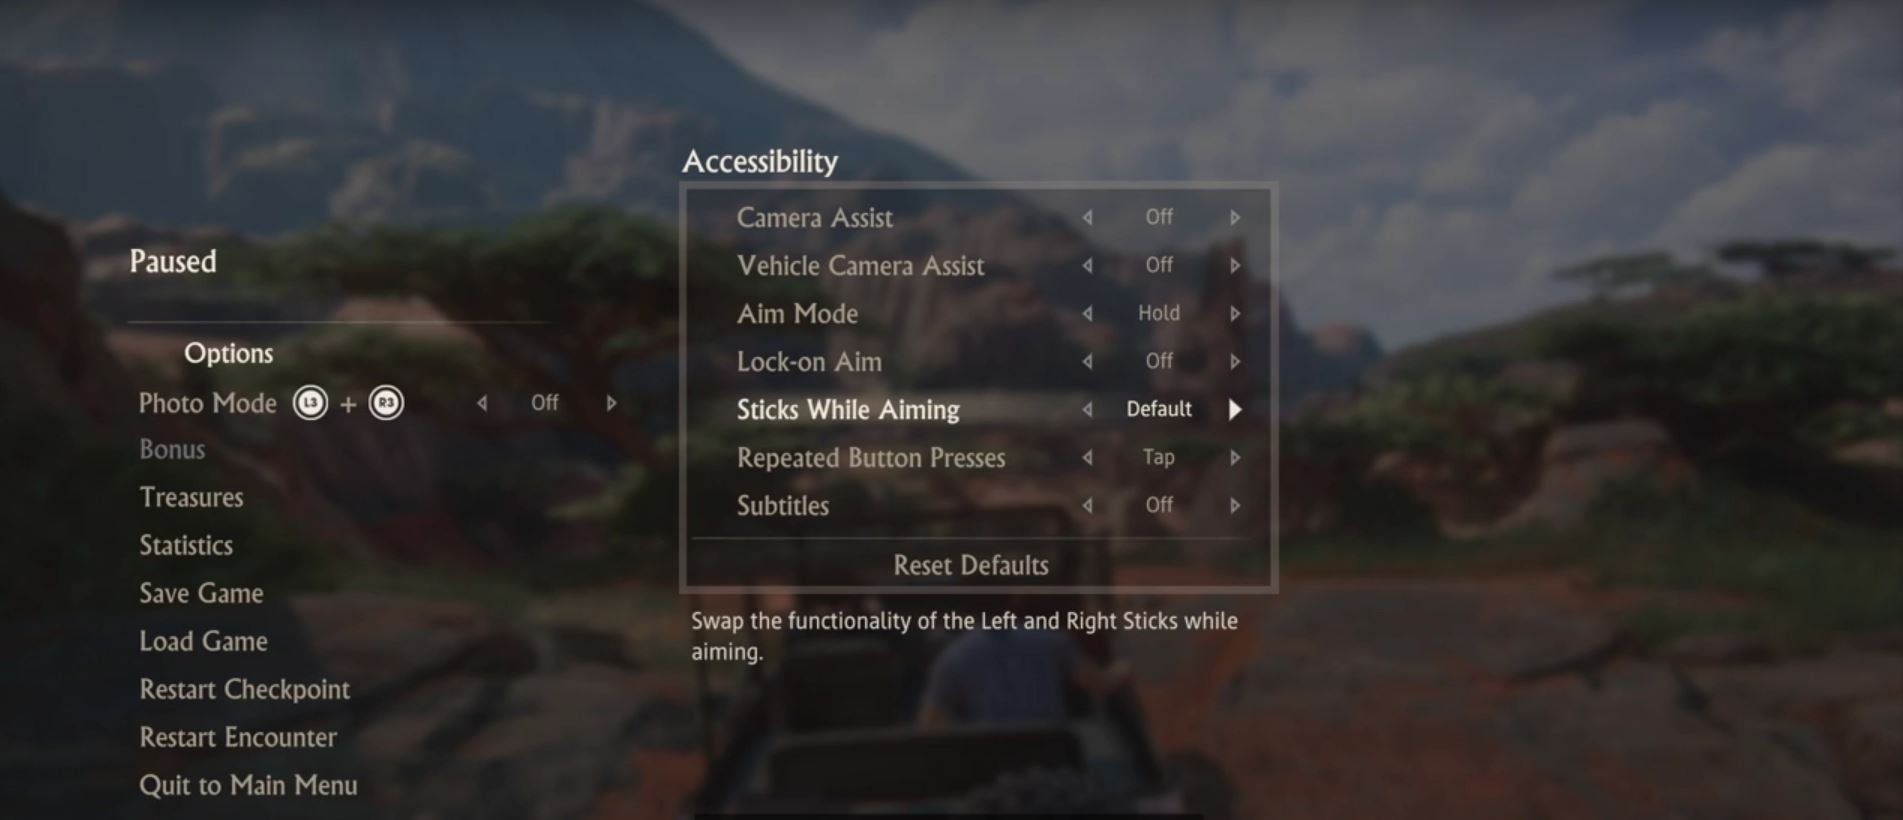 How One Disabled Player Convinced Naughty Dog To Add More Accessibility Options To Uncharted 4